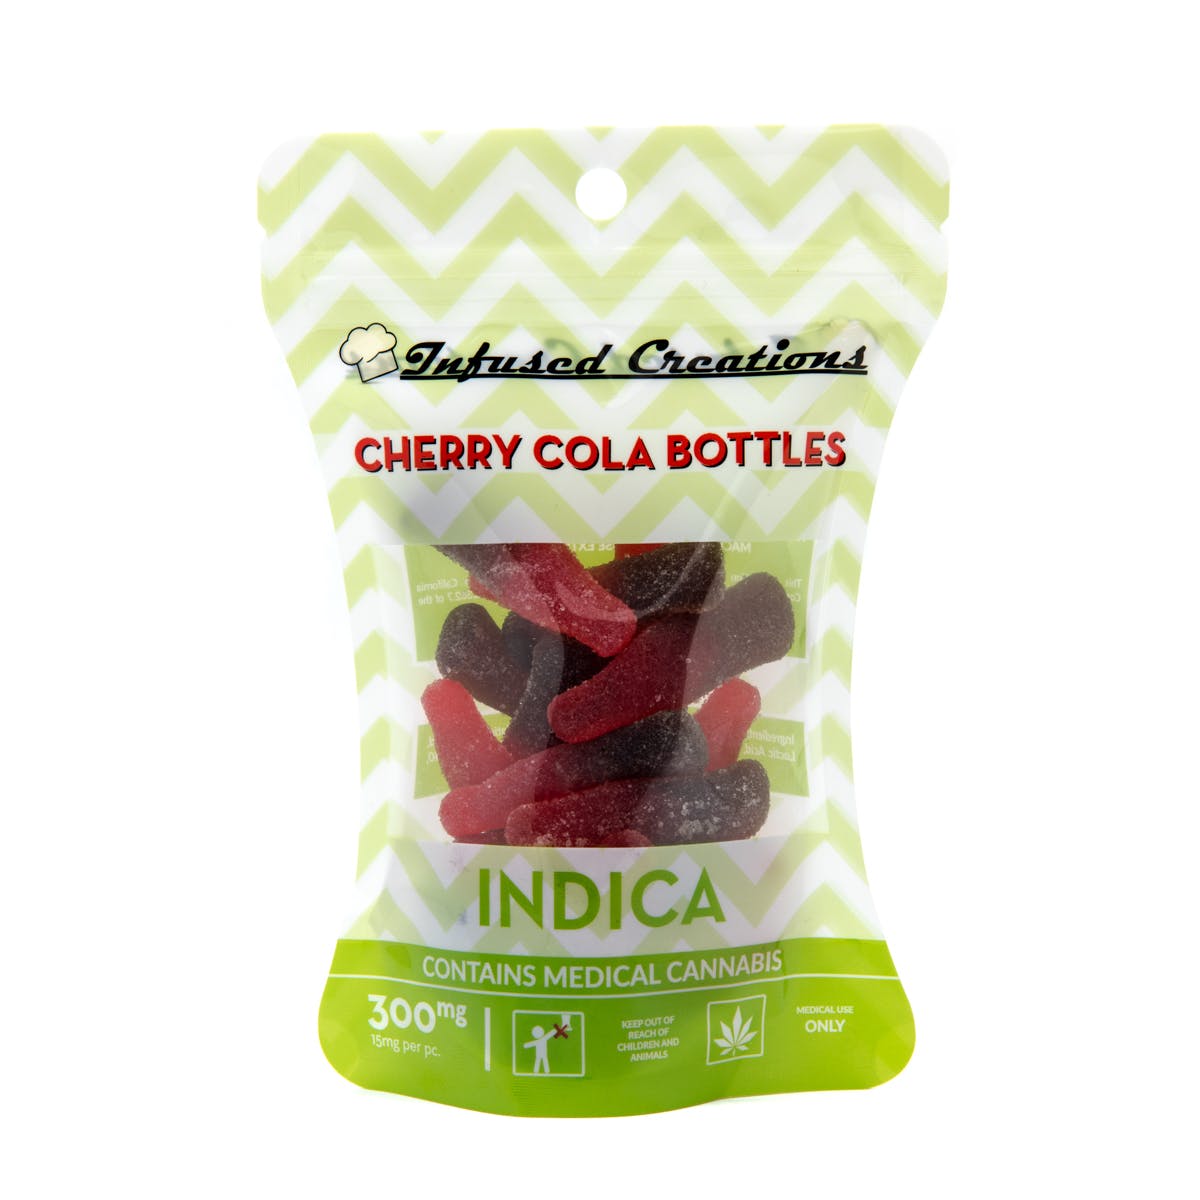 Cherry Cola Bottles Indica, 300mg